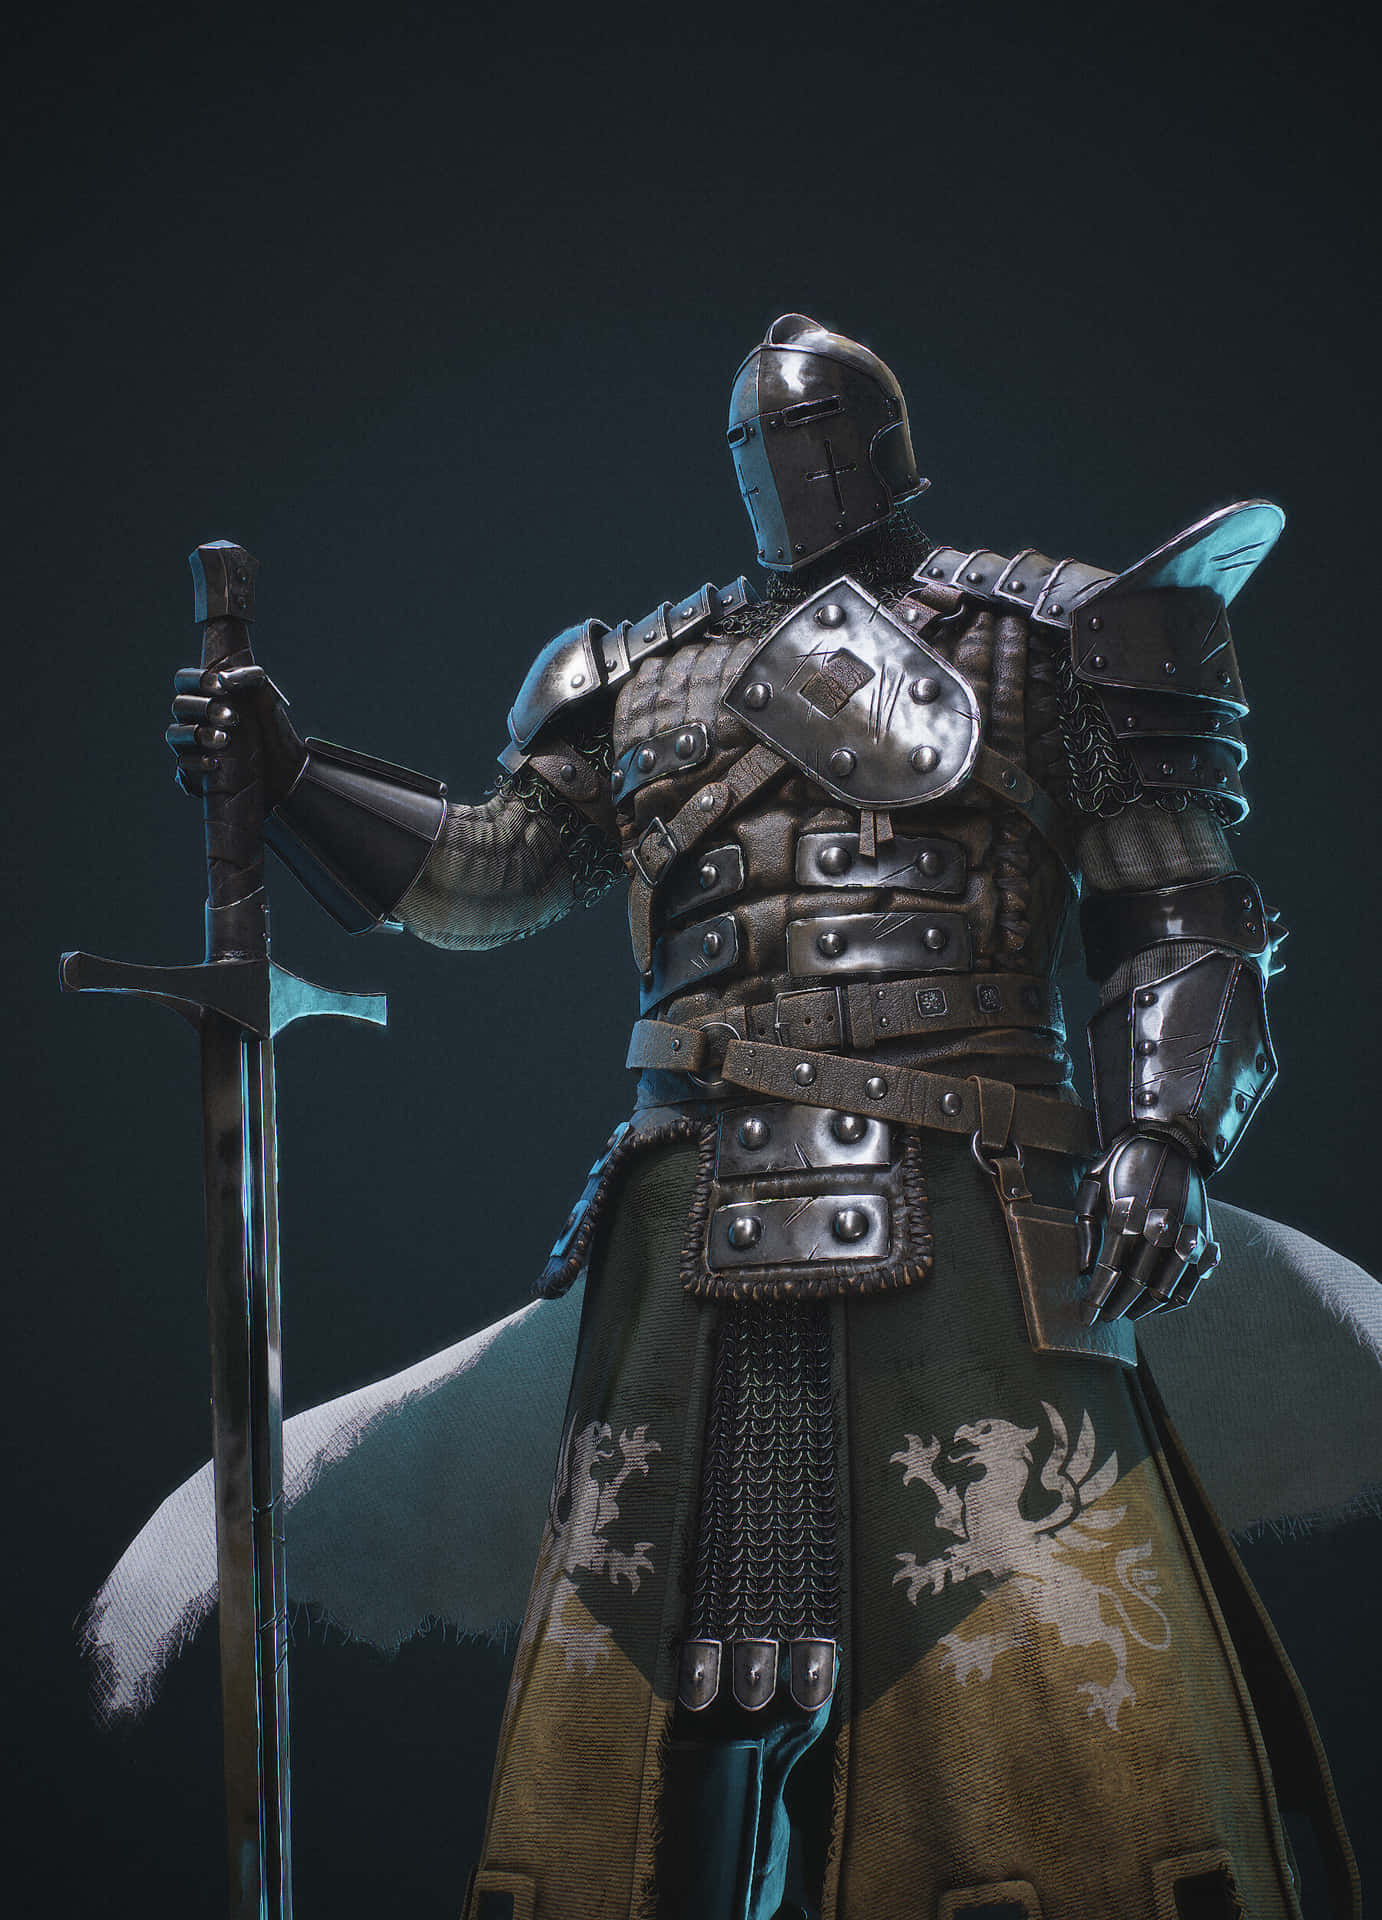 Take up your sword and shield and join the Warden in Ubisofts For Honor Wallpaper